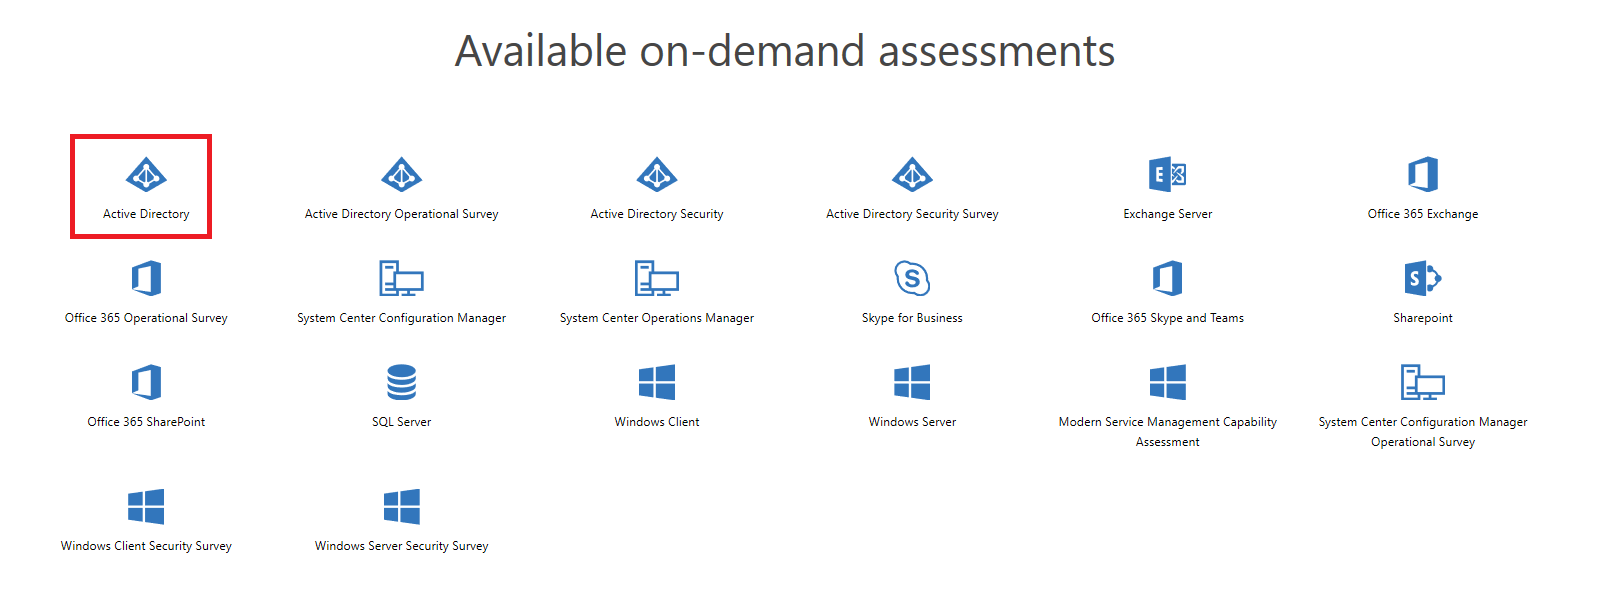 The Available On-Demand Assessments page with the Active Directory assessment highlighted.